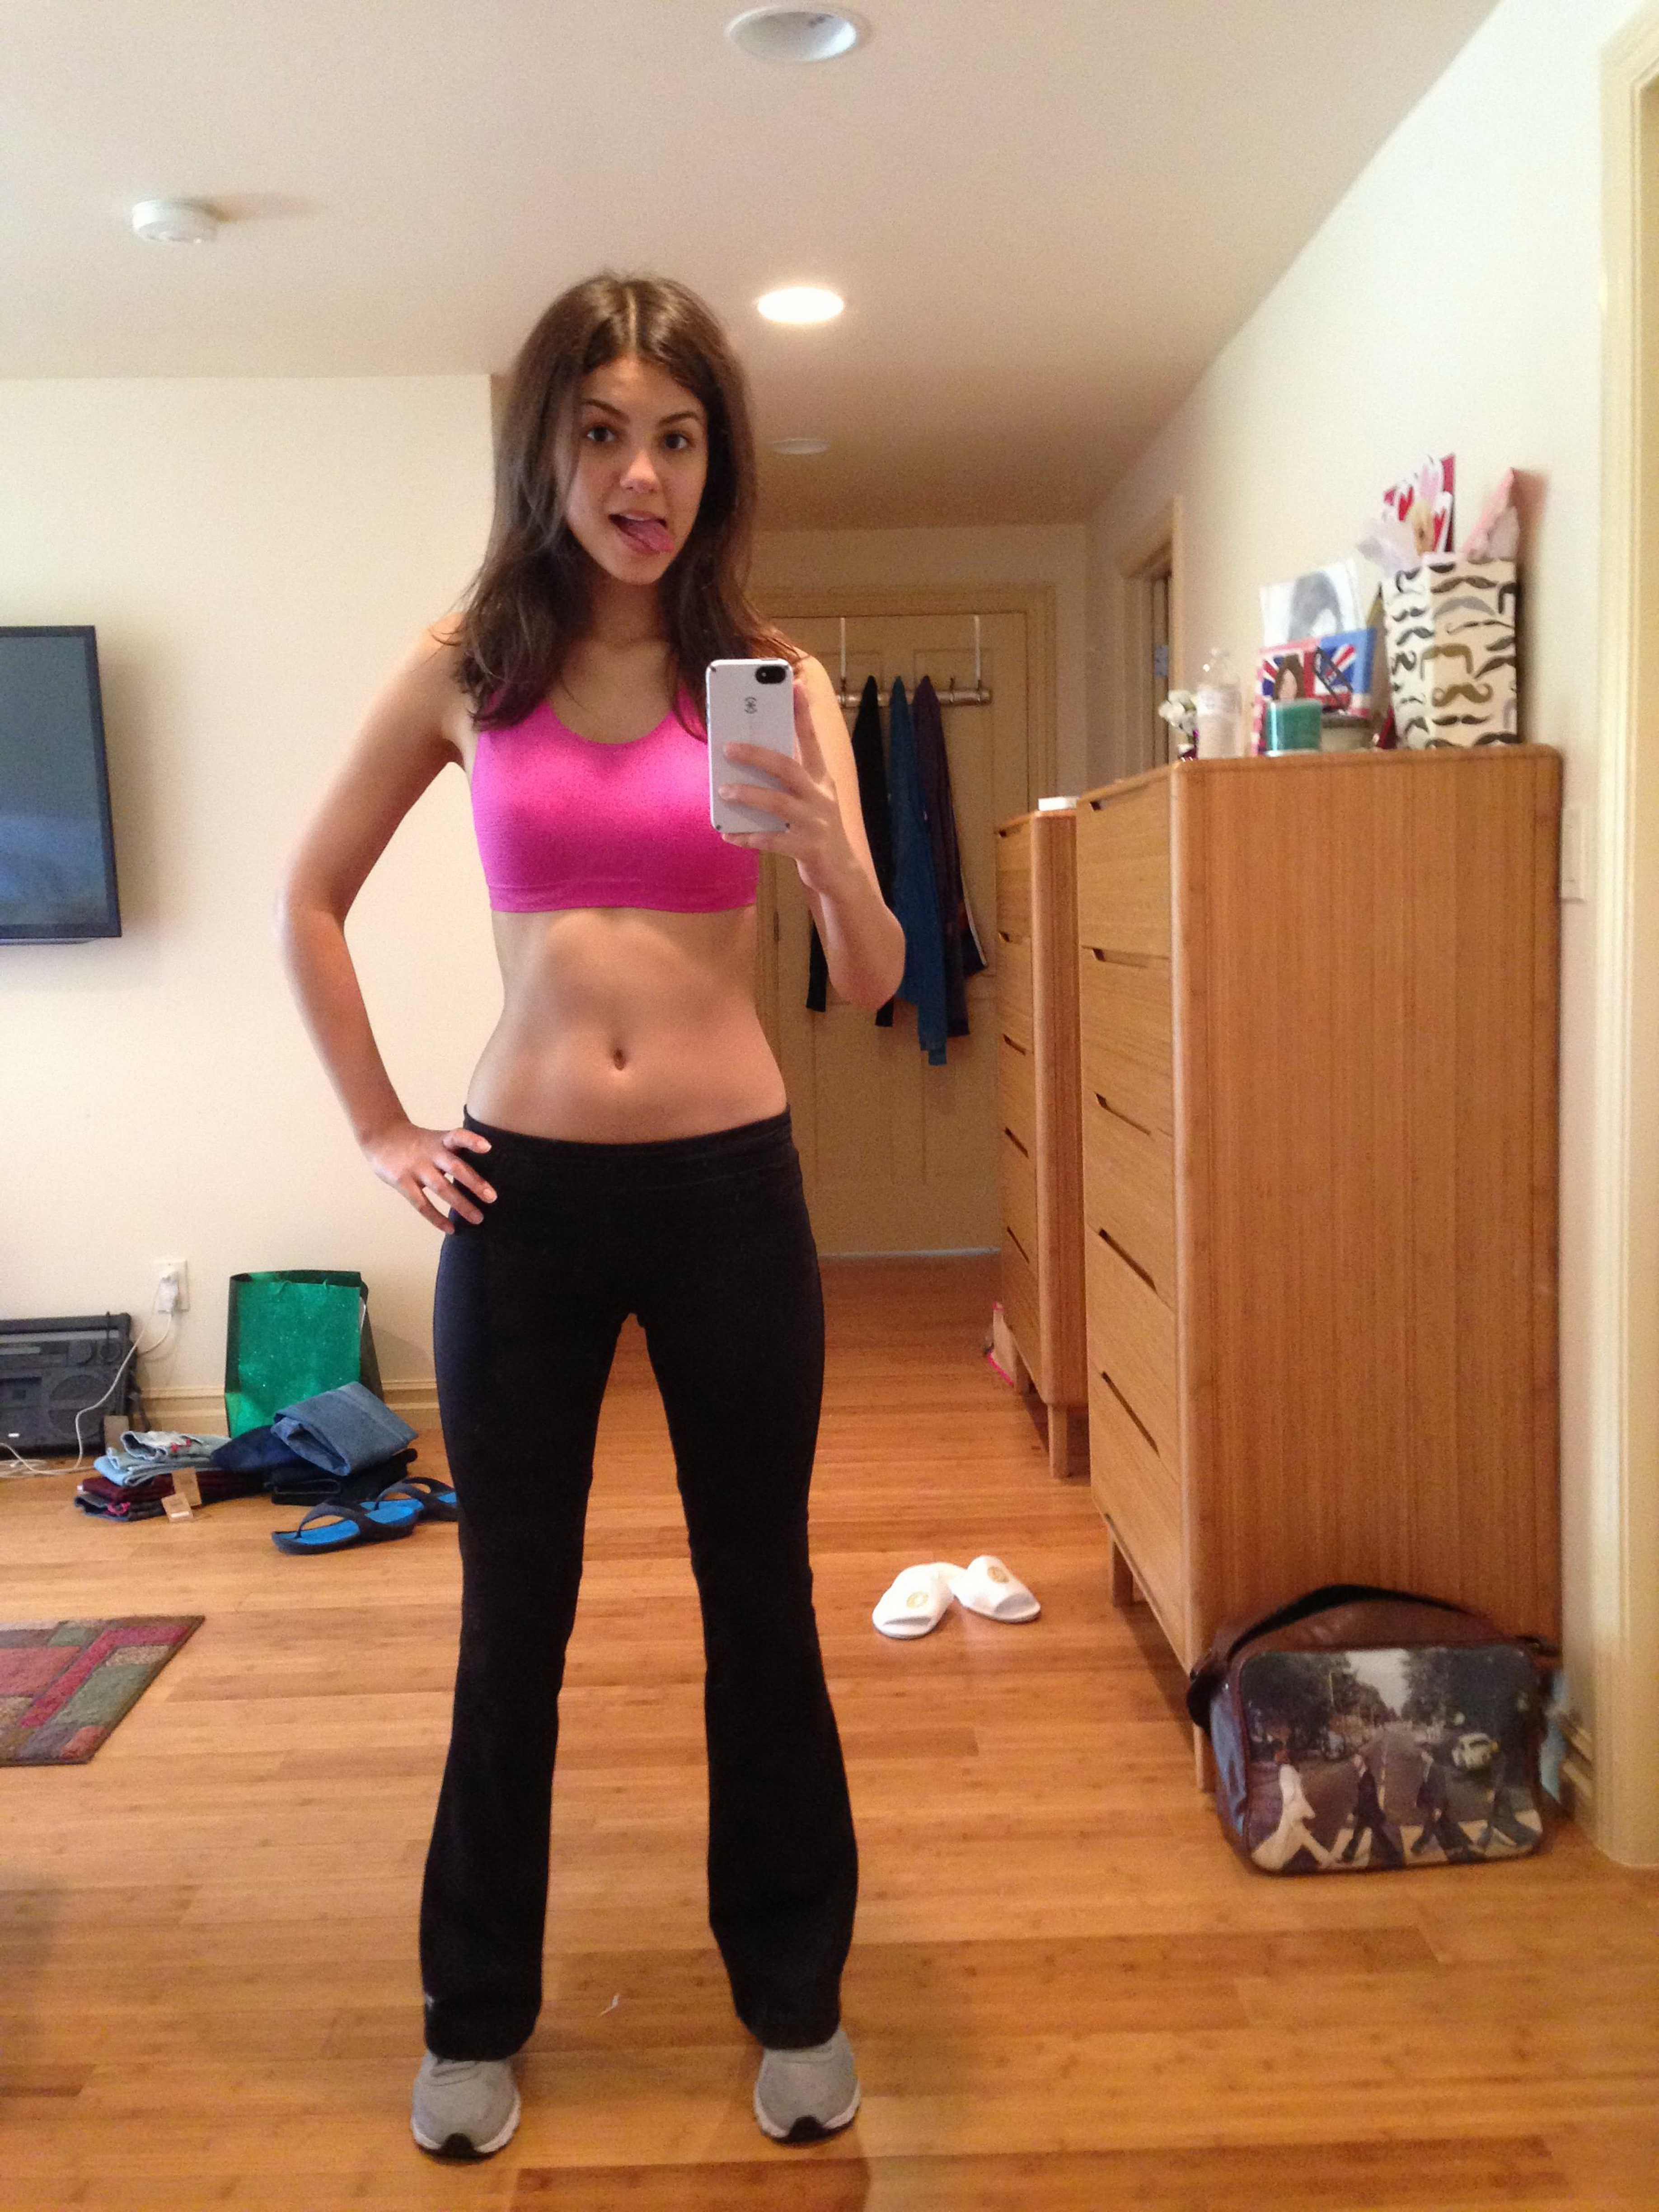 Victoria_Justice_leaked_private_nude_photo_hacked_personal_naked_pics_36x_MixQ_14.jpg